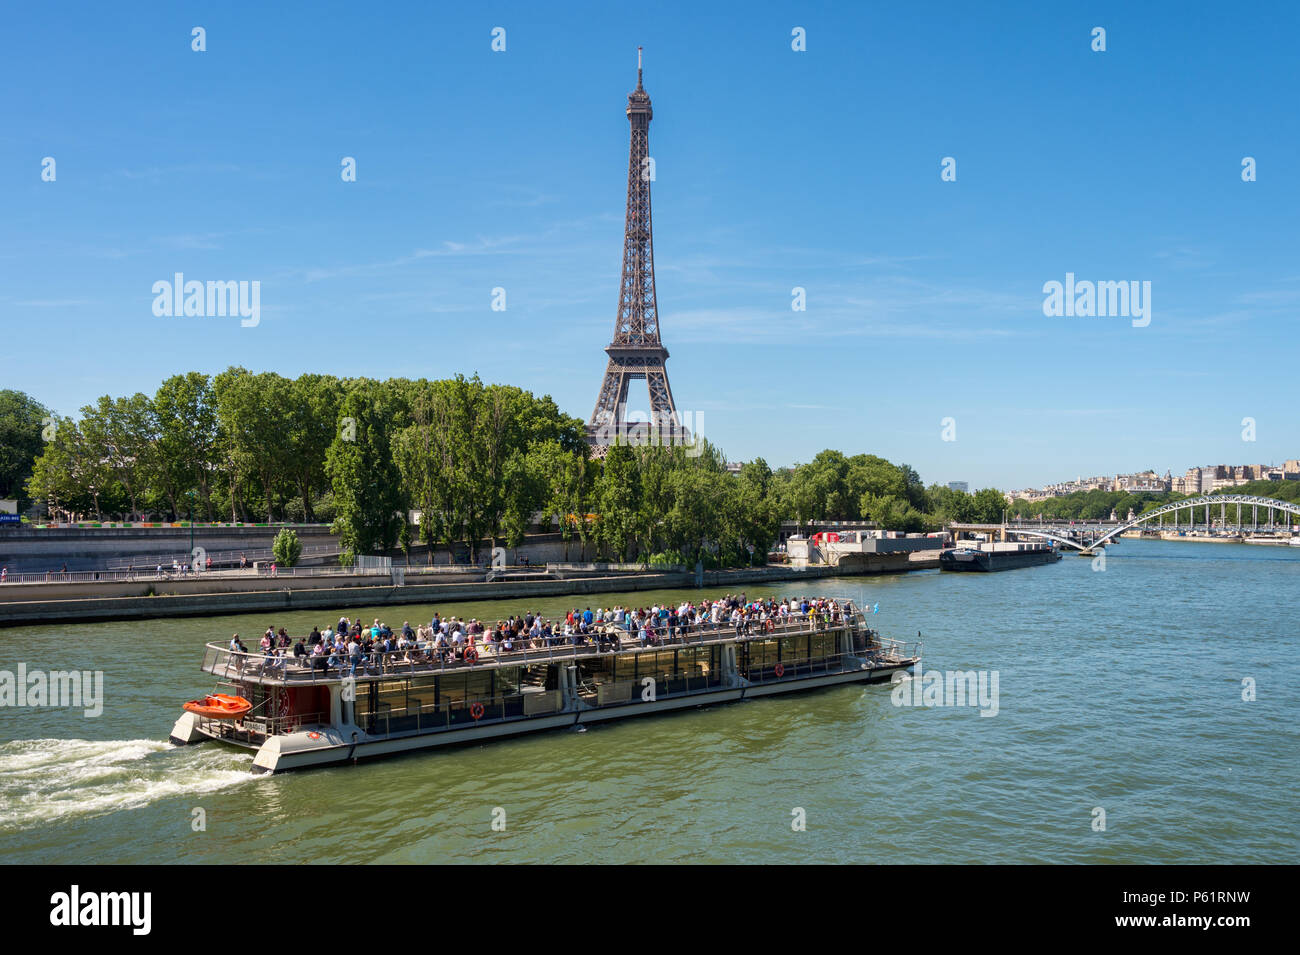 Paris, France - 23 June 2018: Bateau Mouche on the Seine river with Eiffel Tower in the background Stock Photo